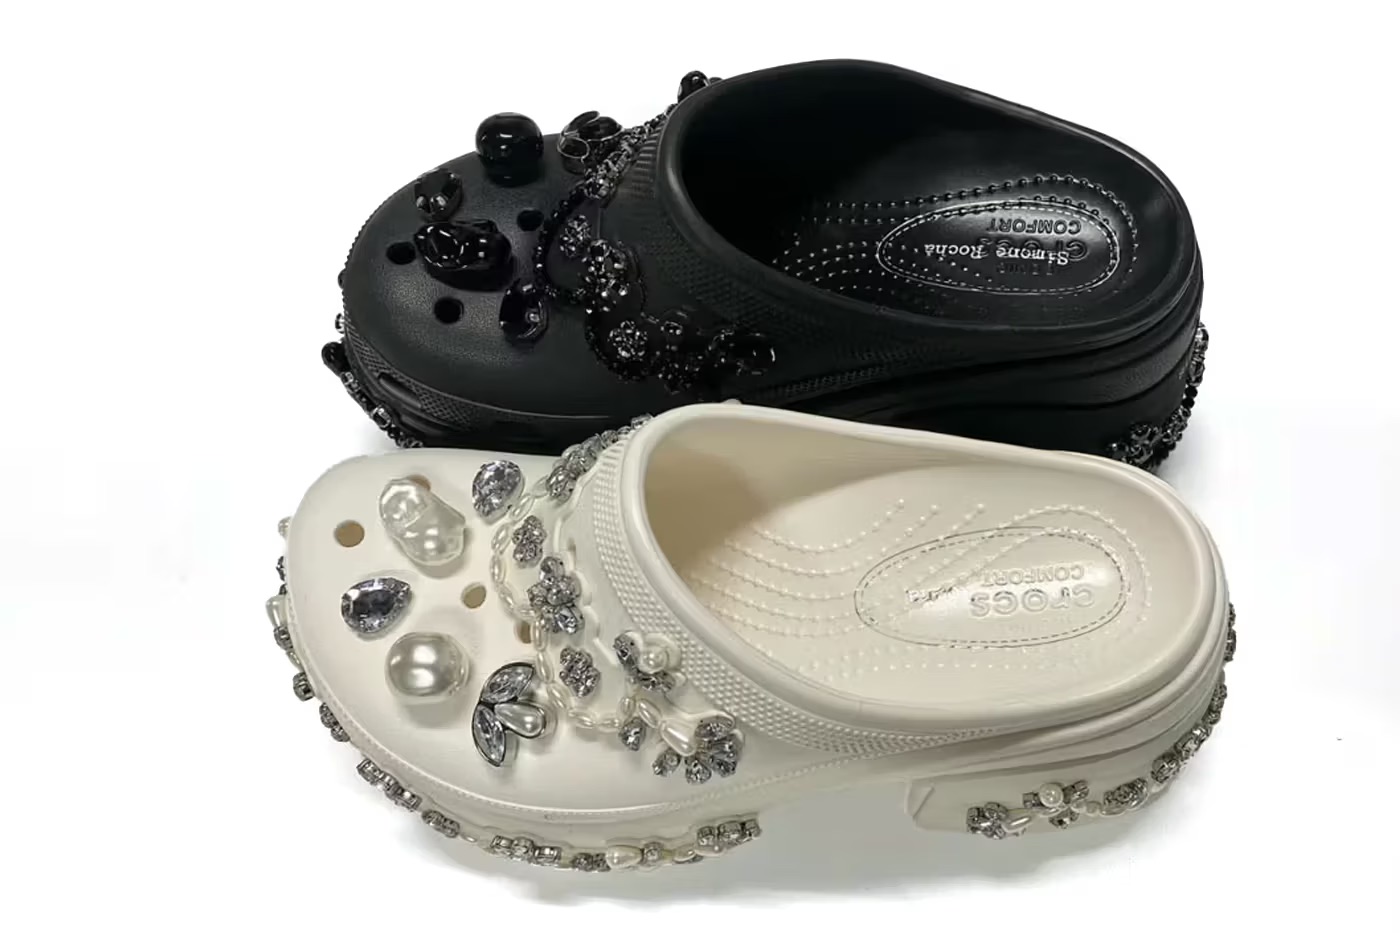 This is what the latest Crocs designed by Simone Rocha look like ...